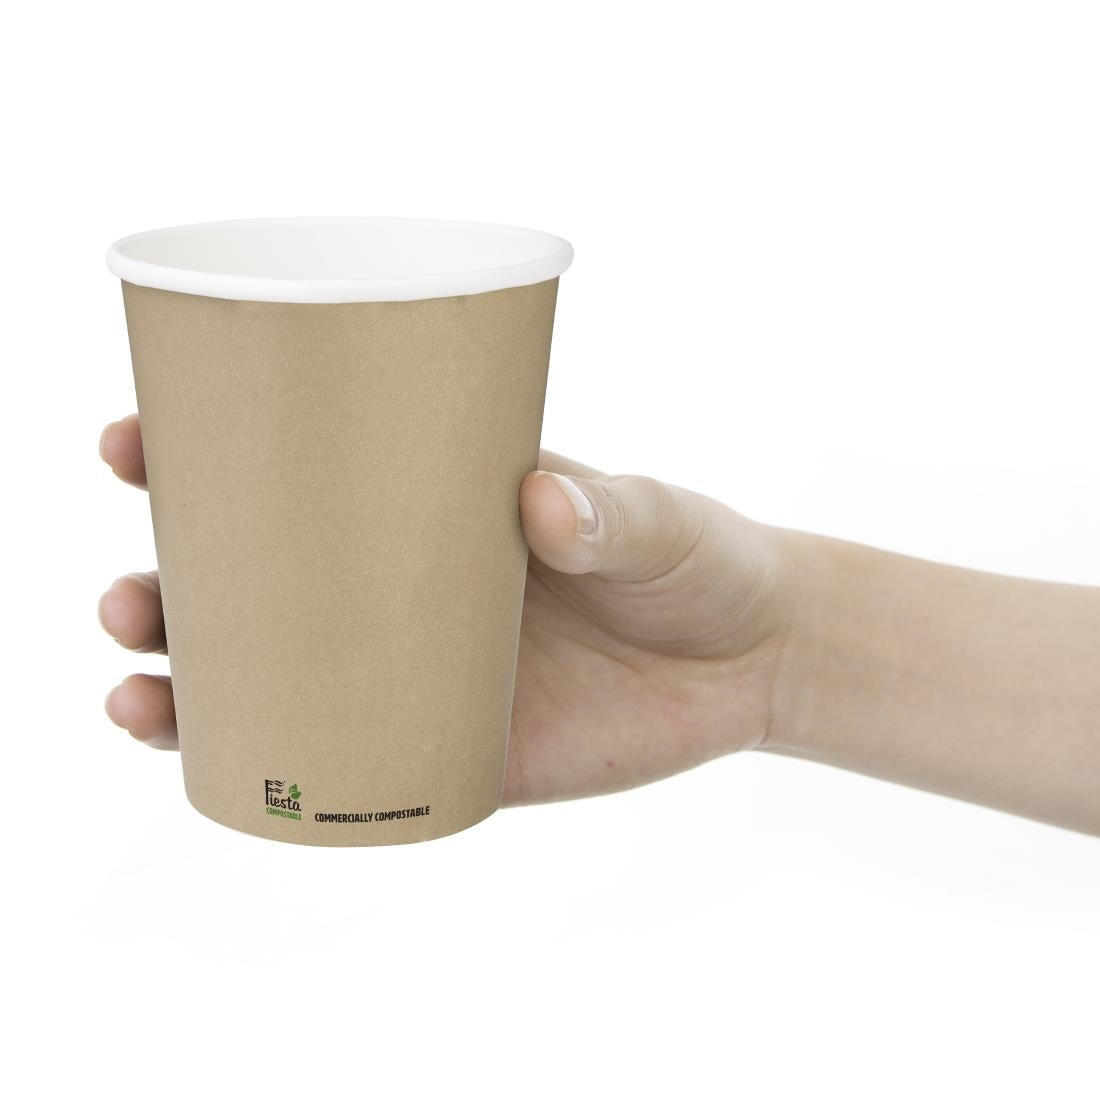 CU982 Fiesta Compostable Coffee Cups Single Wall 340ml / 12oz (Pack of 1000)